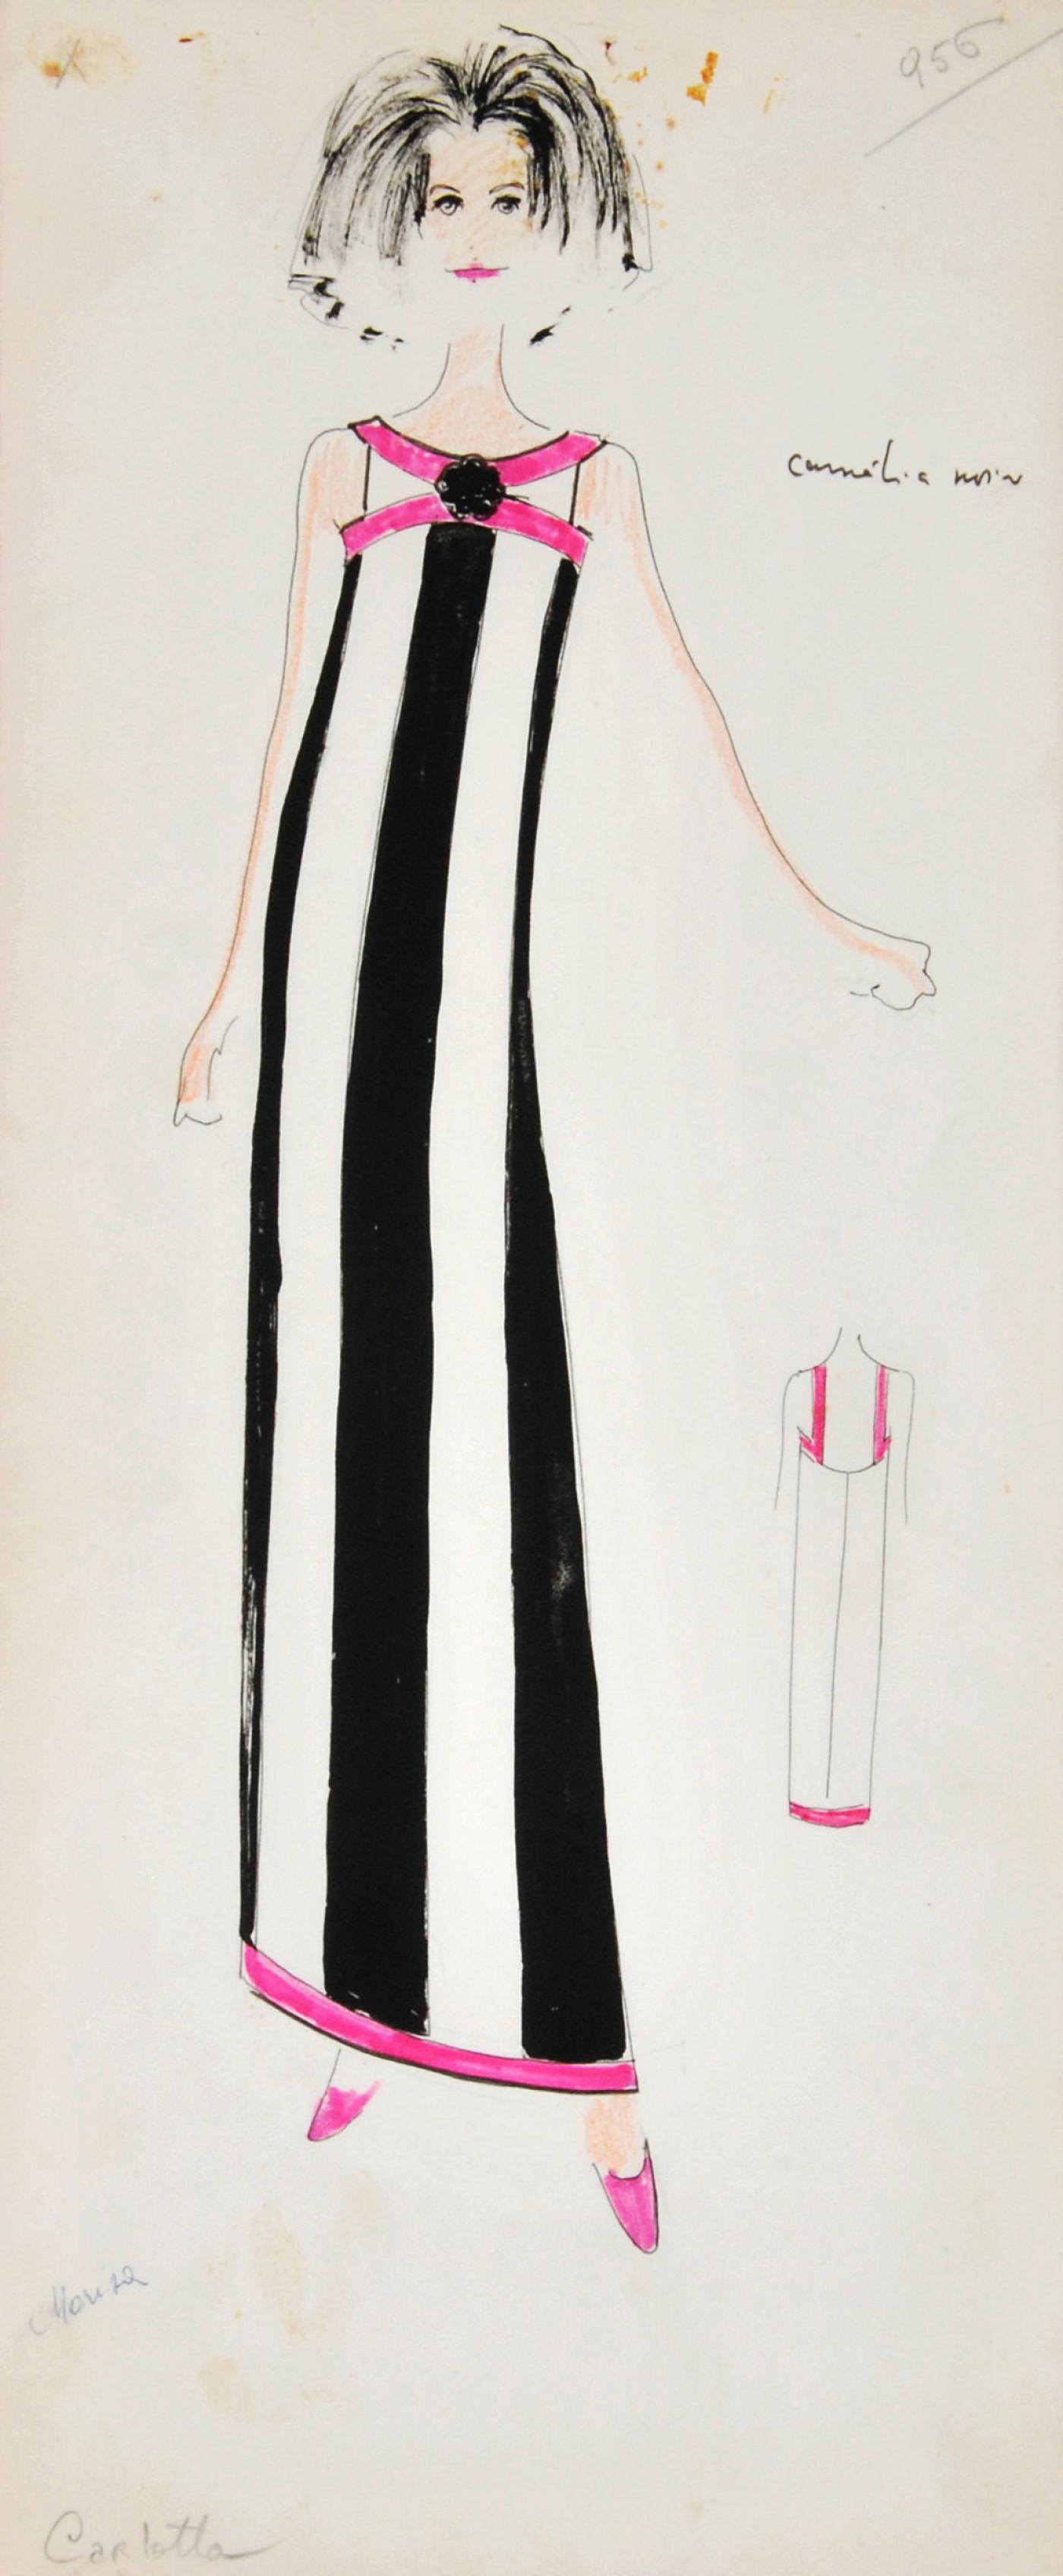 Sold at Auction: Karl Lagerfeld, Karl Lagerfeld Fashion Drawing